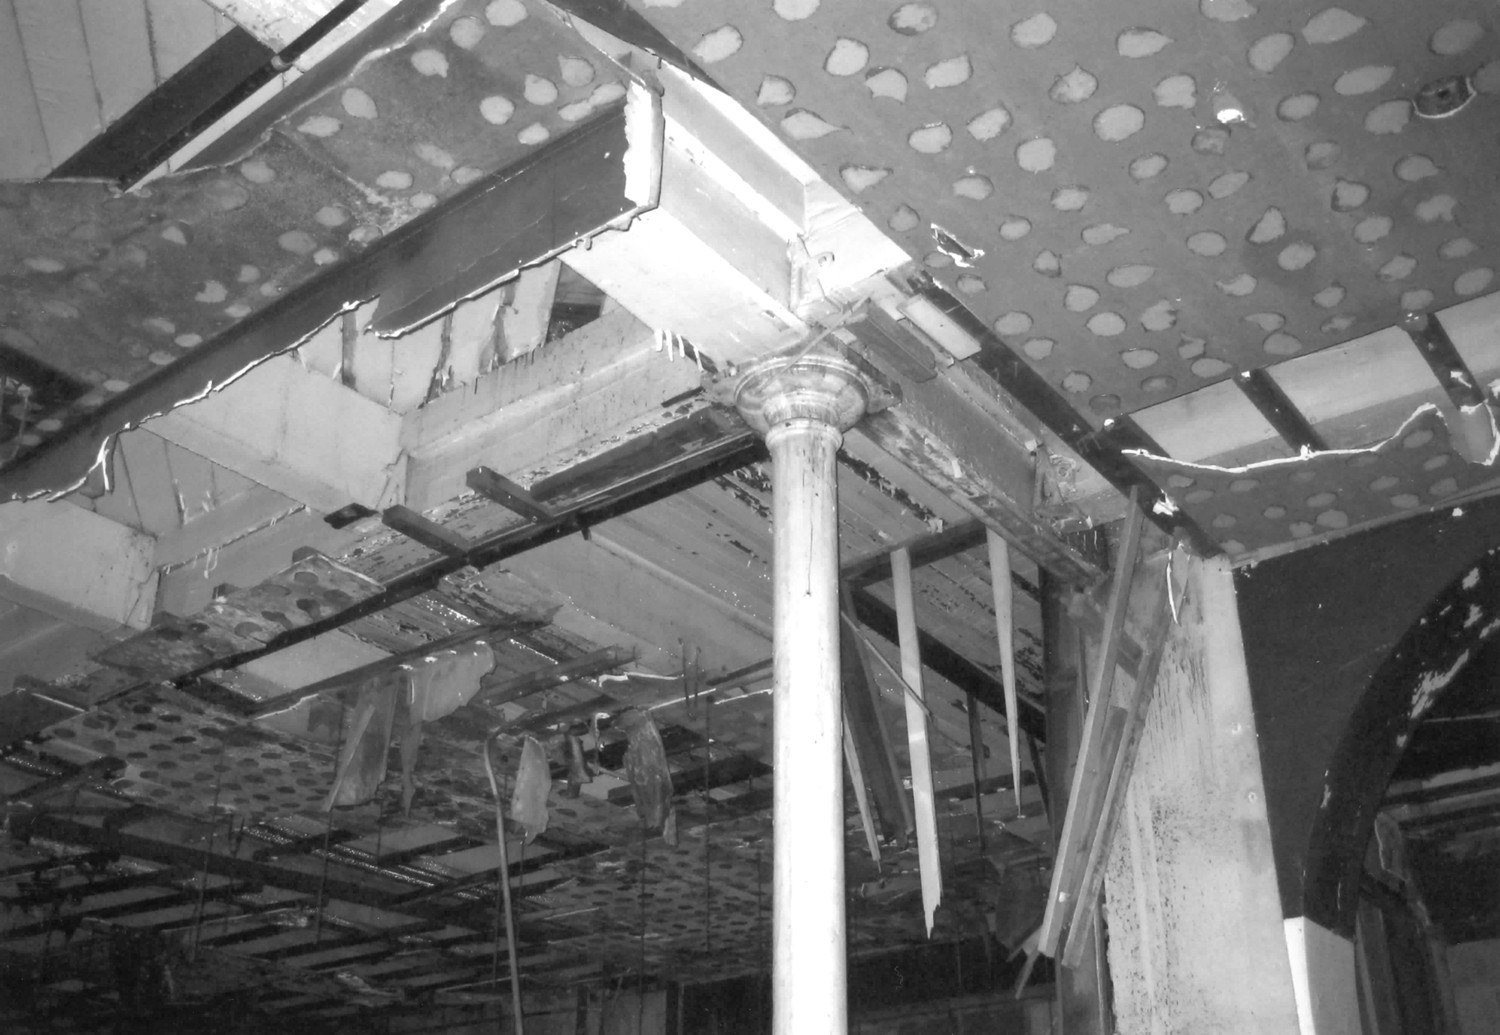 Joseph and Feiss Clothcraft Shops, Cleveland Ohio Administration building interior, first floor: detail of iron column capital and wood beam structure (2009)